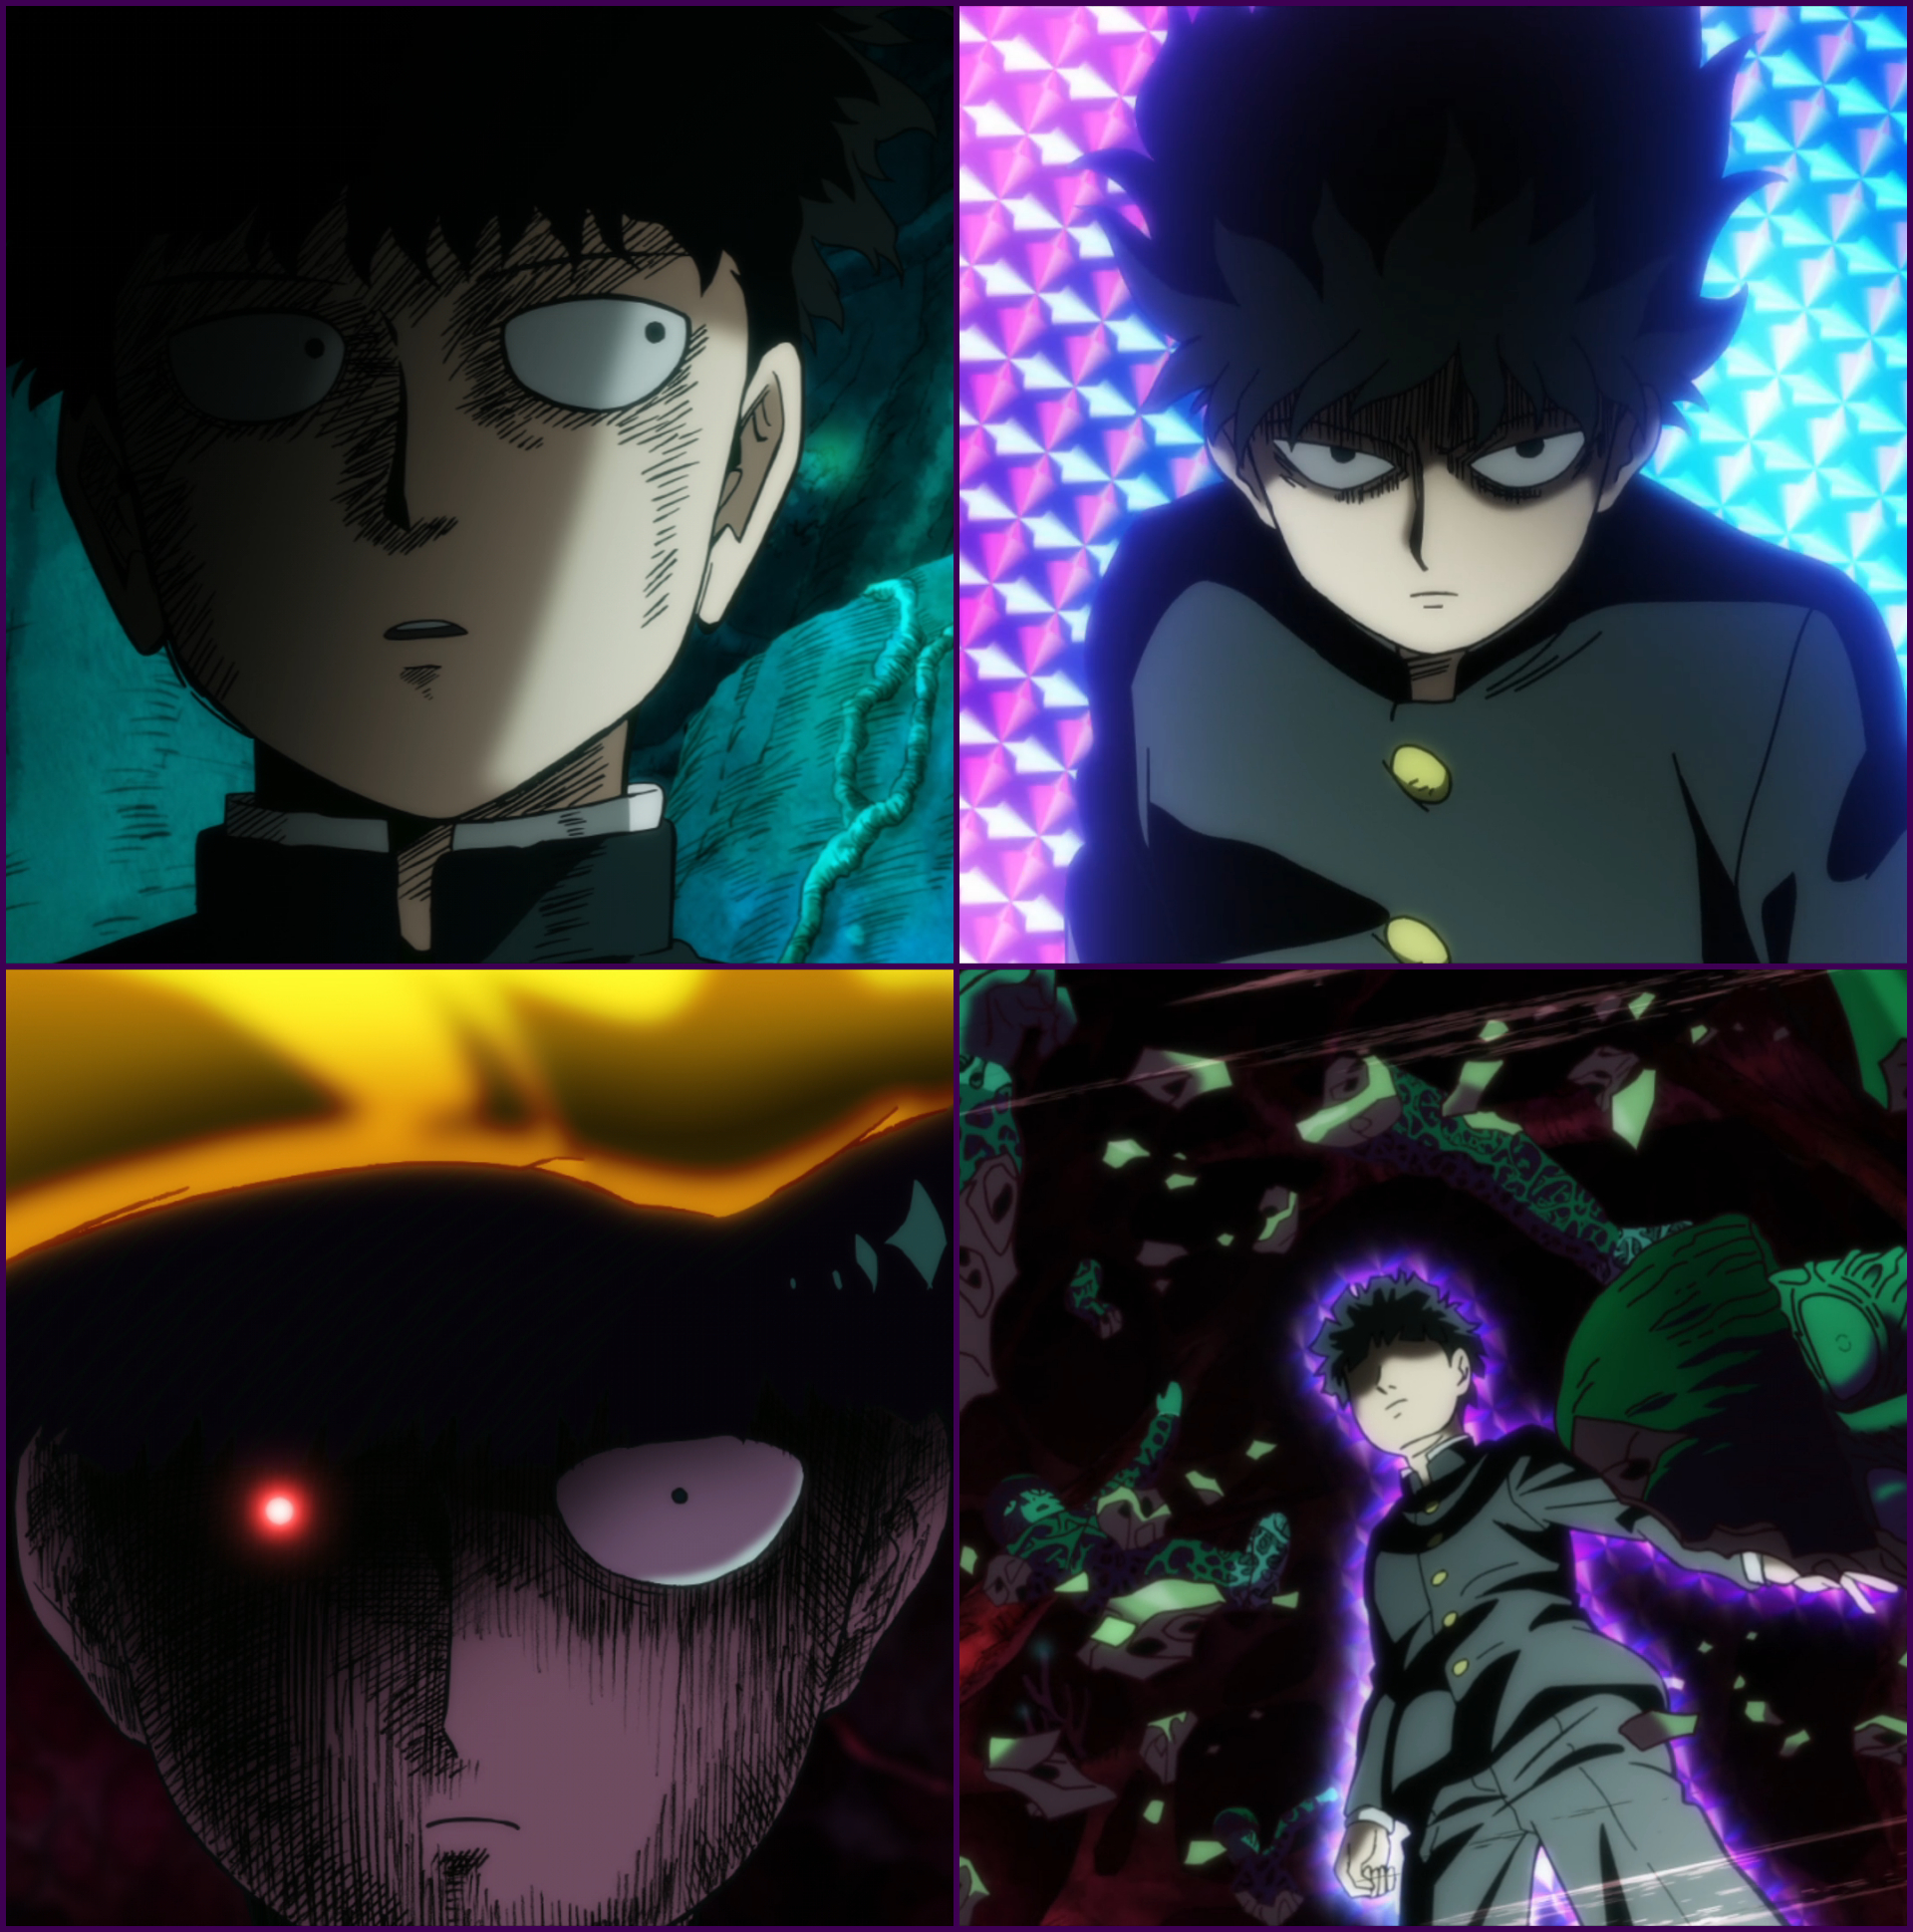 Mob Psycho 100 III Reveals Preview for Episode 3 - Anime Corner